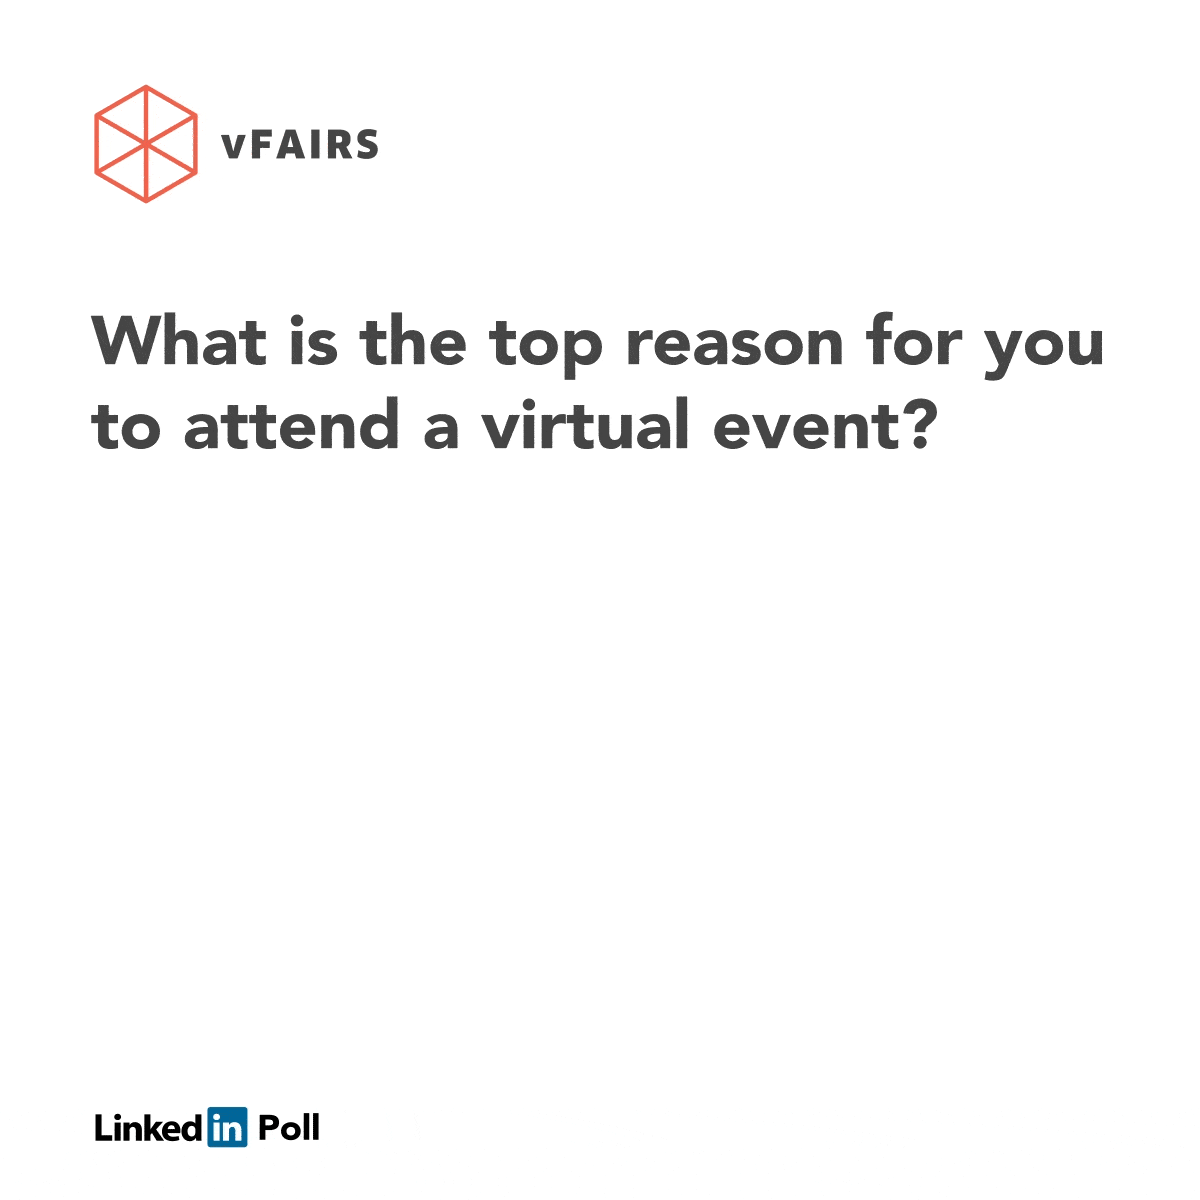 vFairs poll shows the importance of networking at a virtual event.